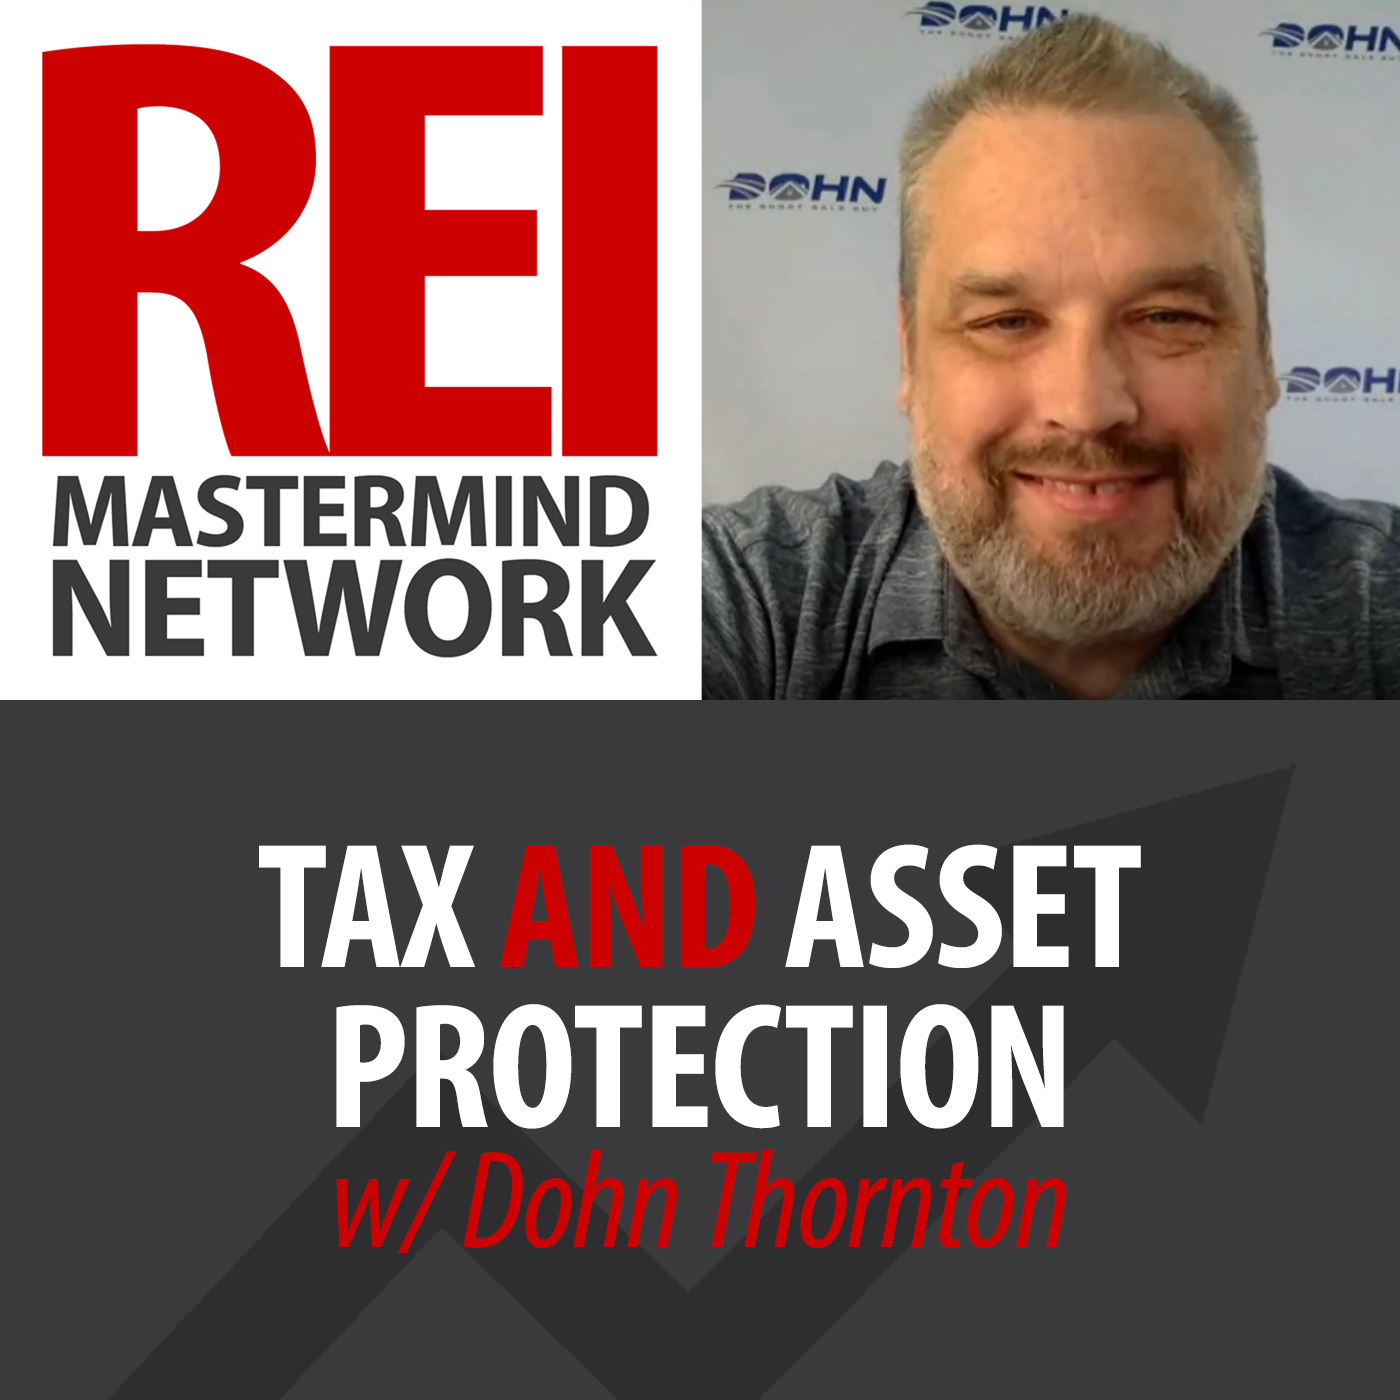 Tax AND Asset Protection with Dohn Thornton